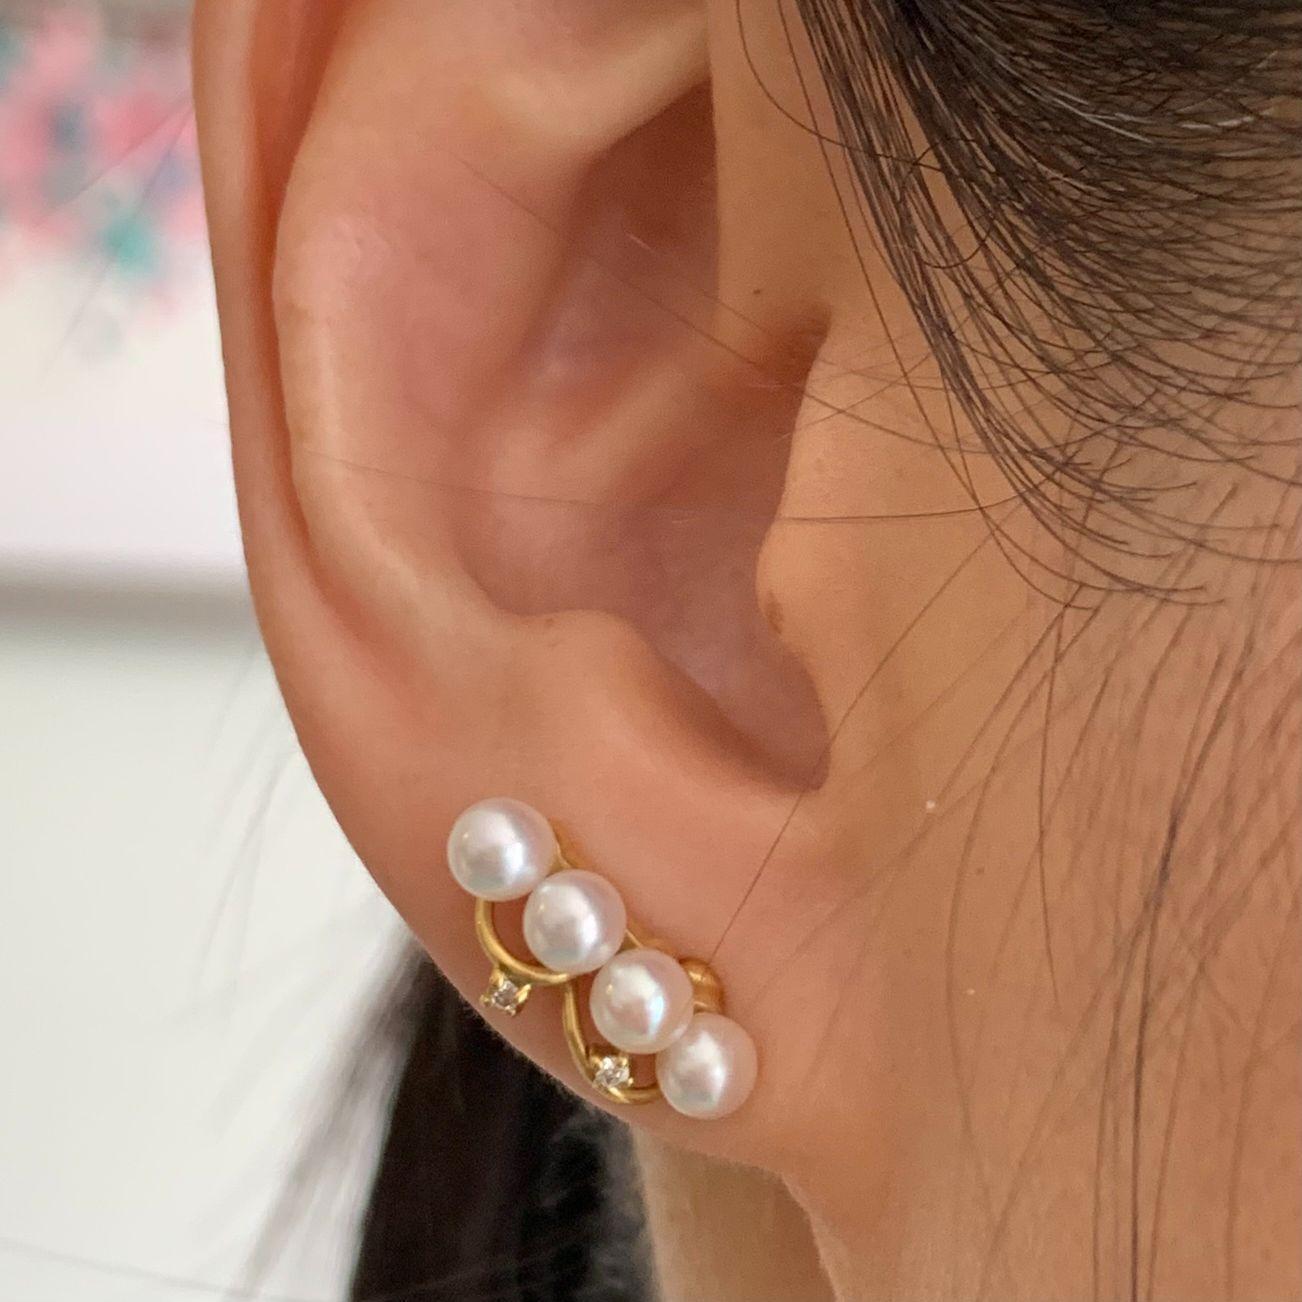 White Baby Akoya Pearl Gold Diamond Earrings, 'E221' In New Condition For Sale In City, SG